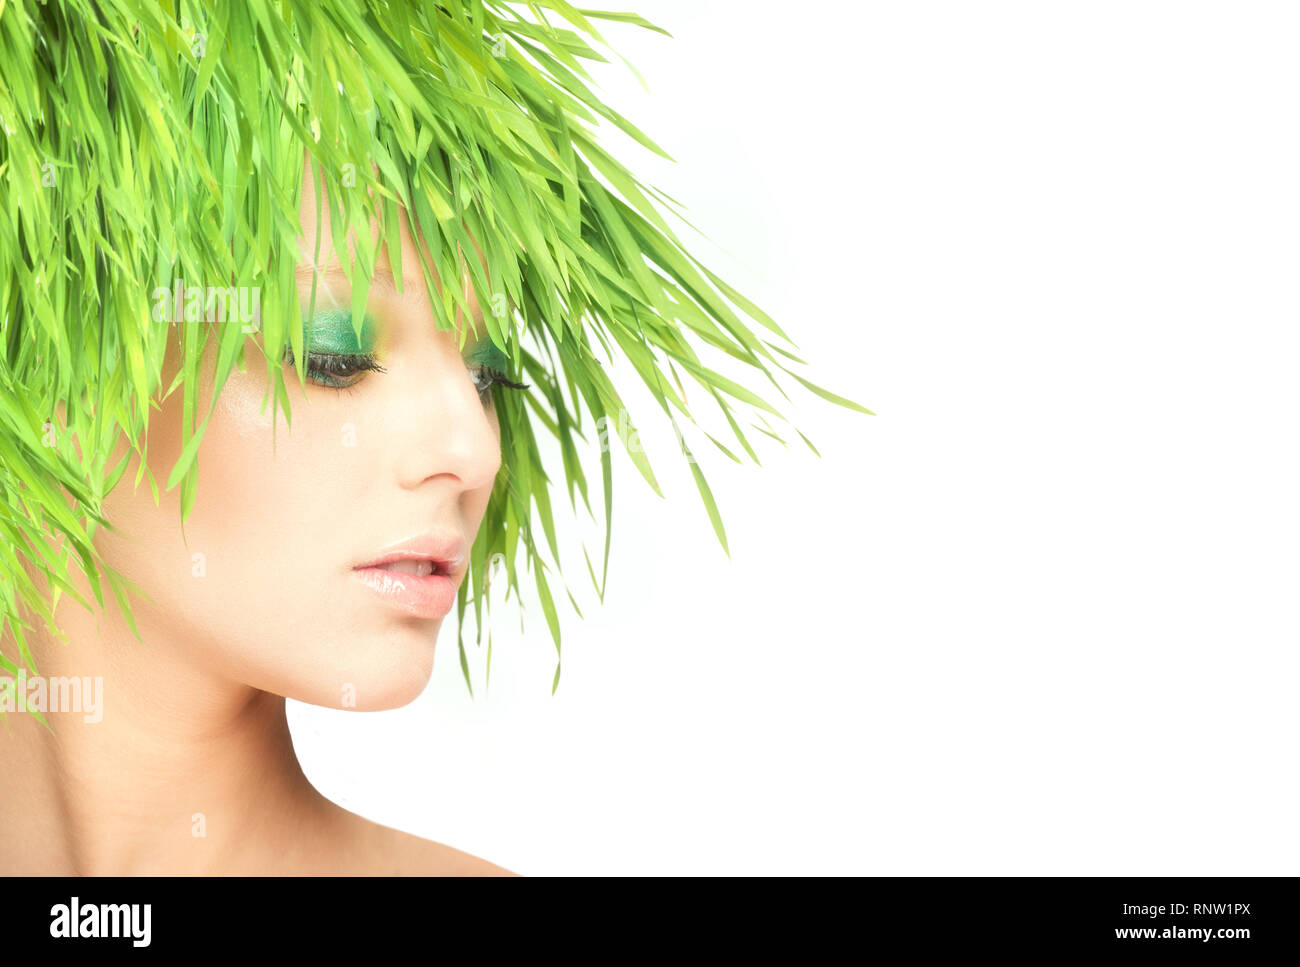 Nature beauty woman with fresh grass hair Stock Photo